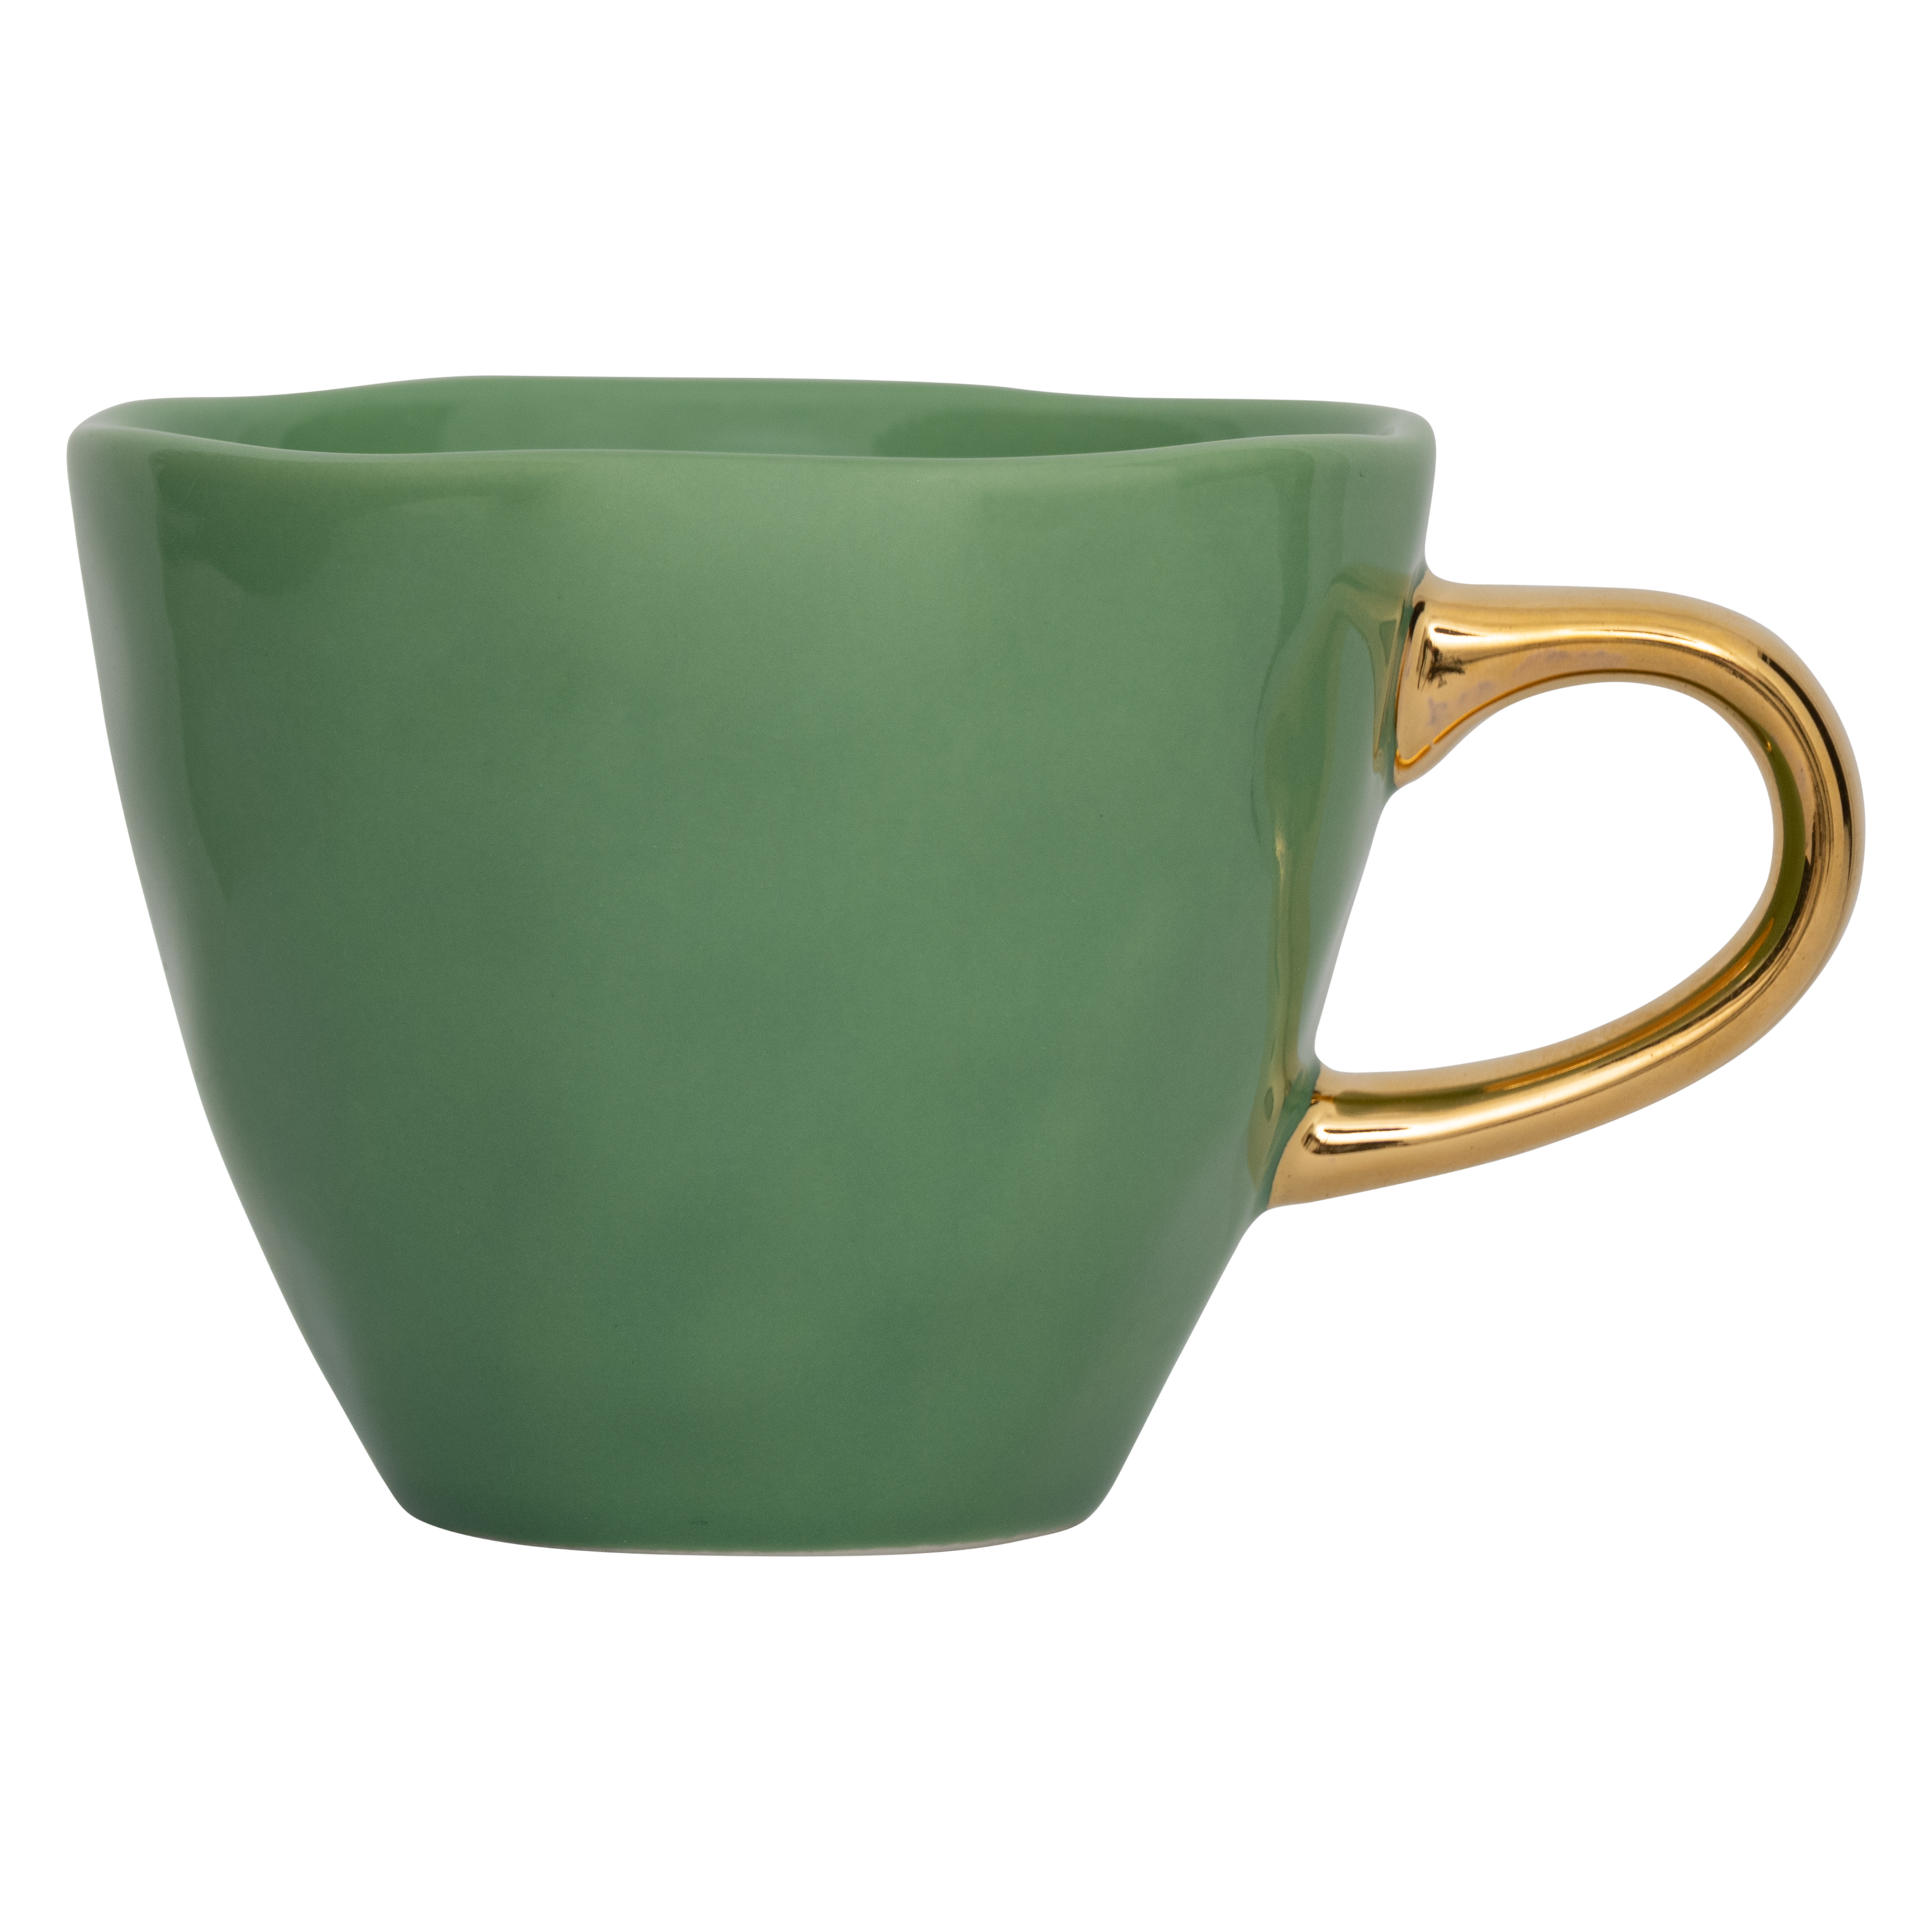 Urban Nature Culture Good Morning Coffee Cup - Green - Sustainable